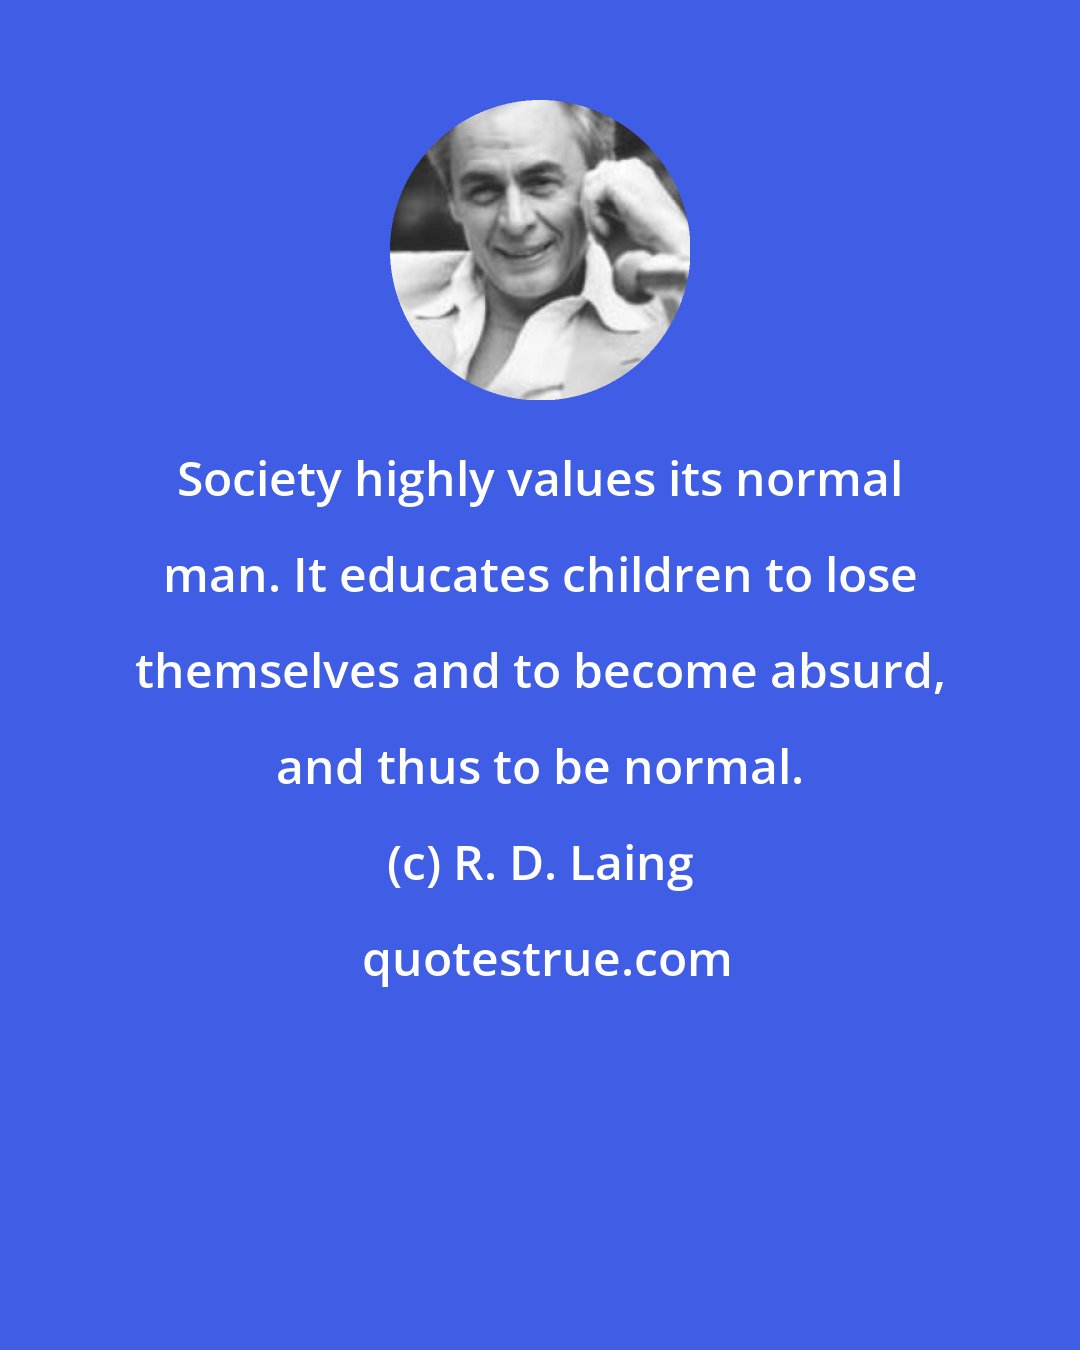 R. D. Laing: Society highly values its normal man. It educates children to lose themselves and to become absurd, and thus to be normal.